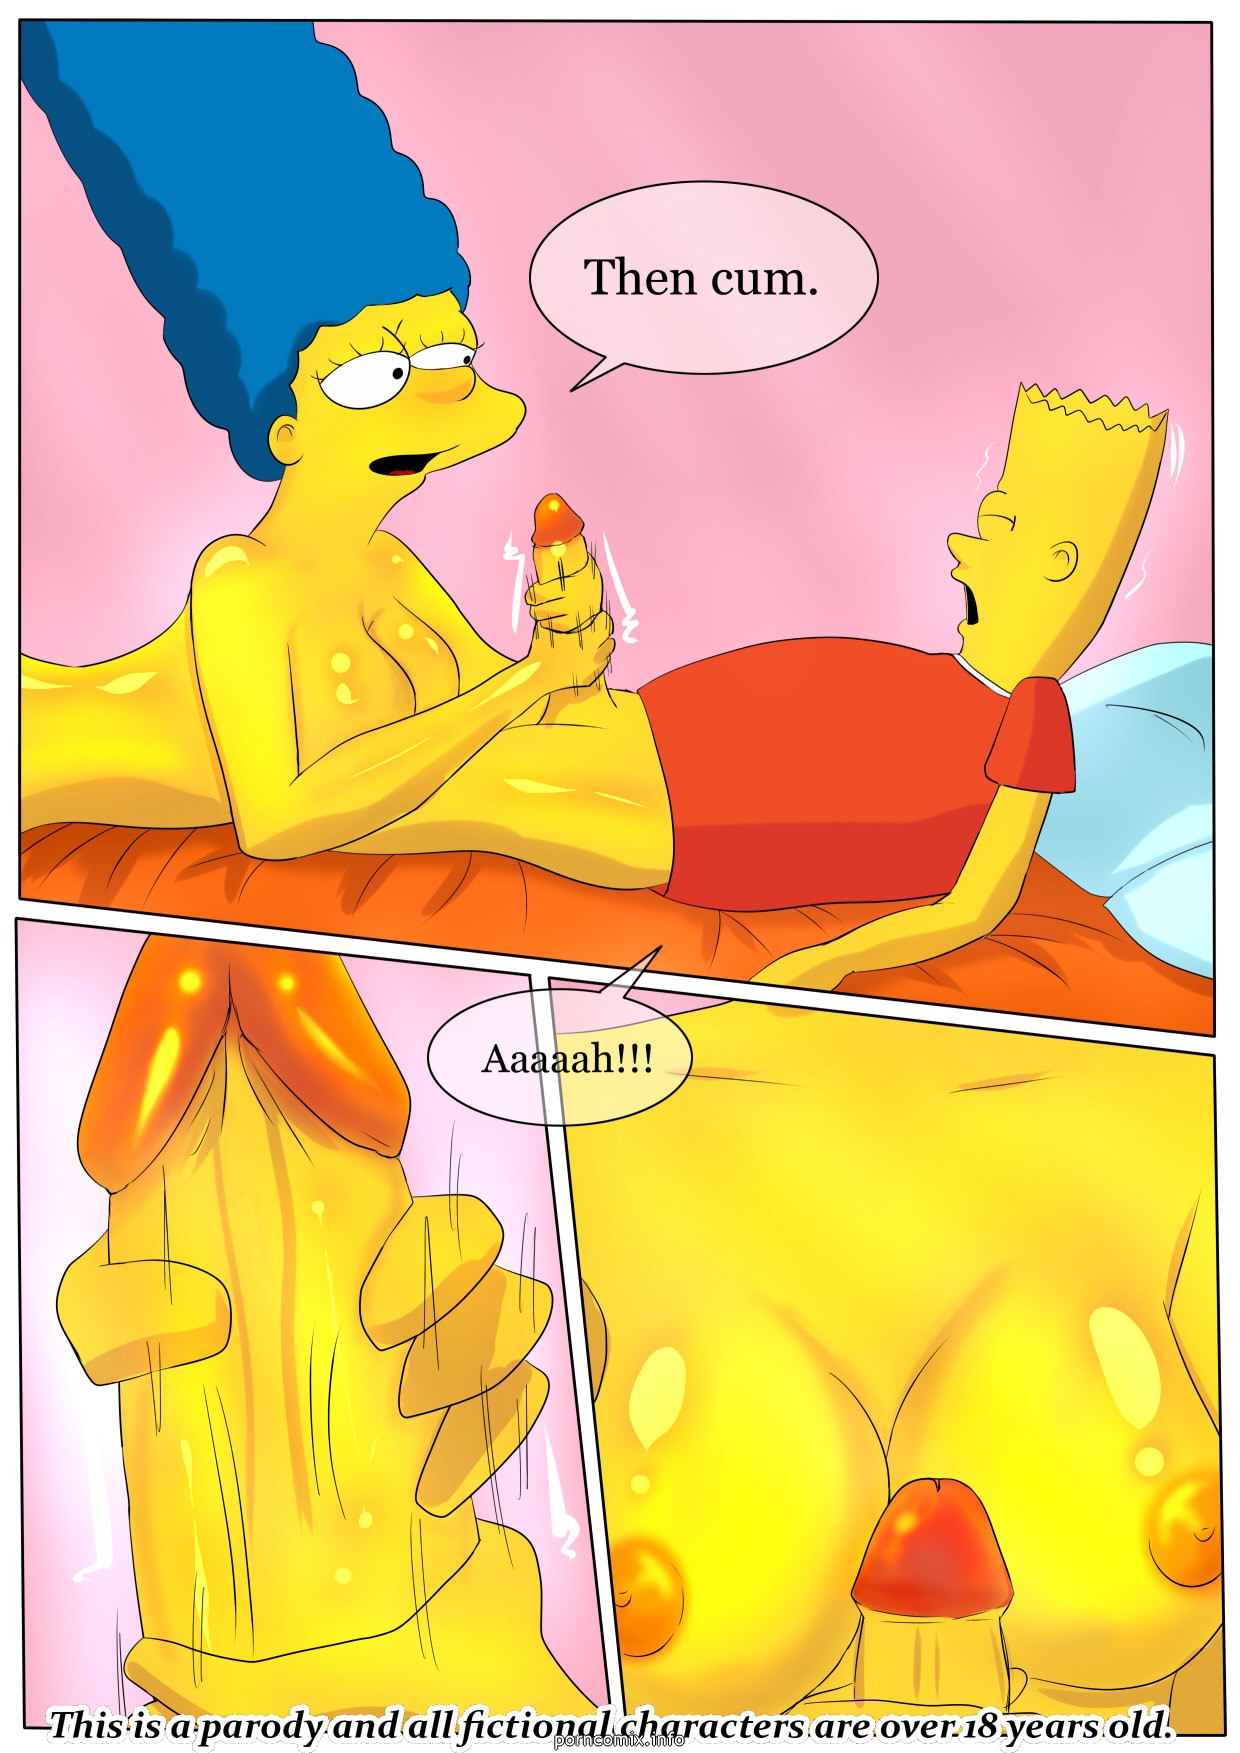 Simpsons- Helping Mom - part 2